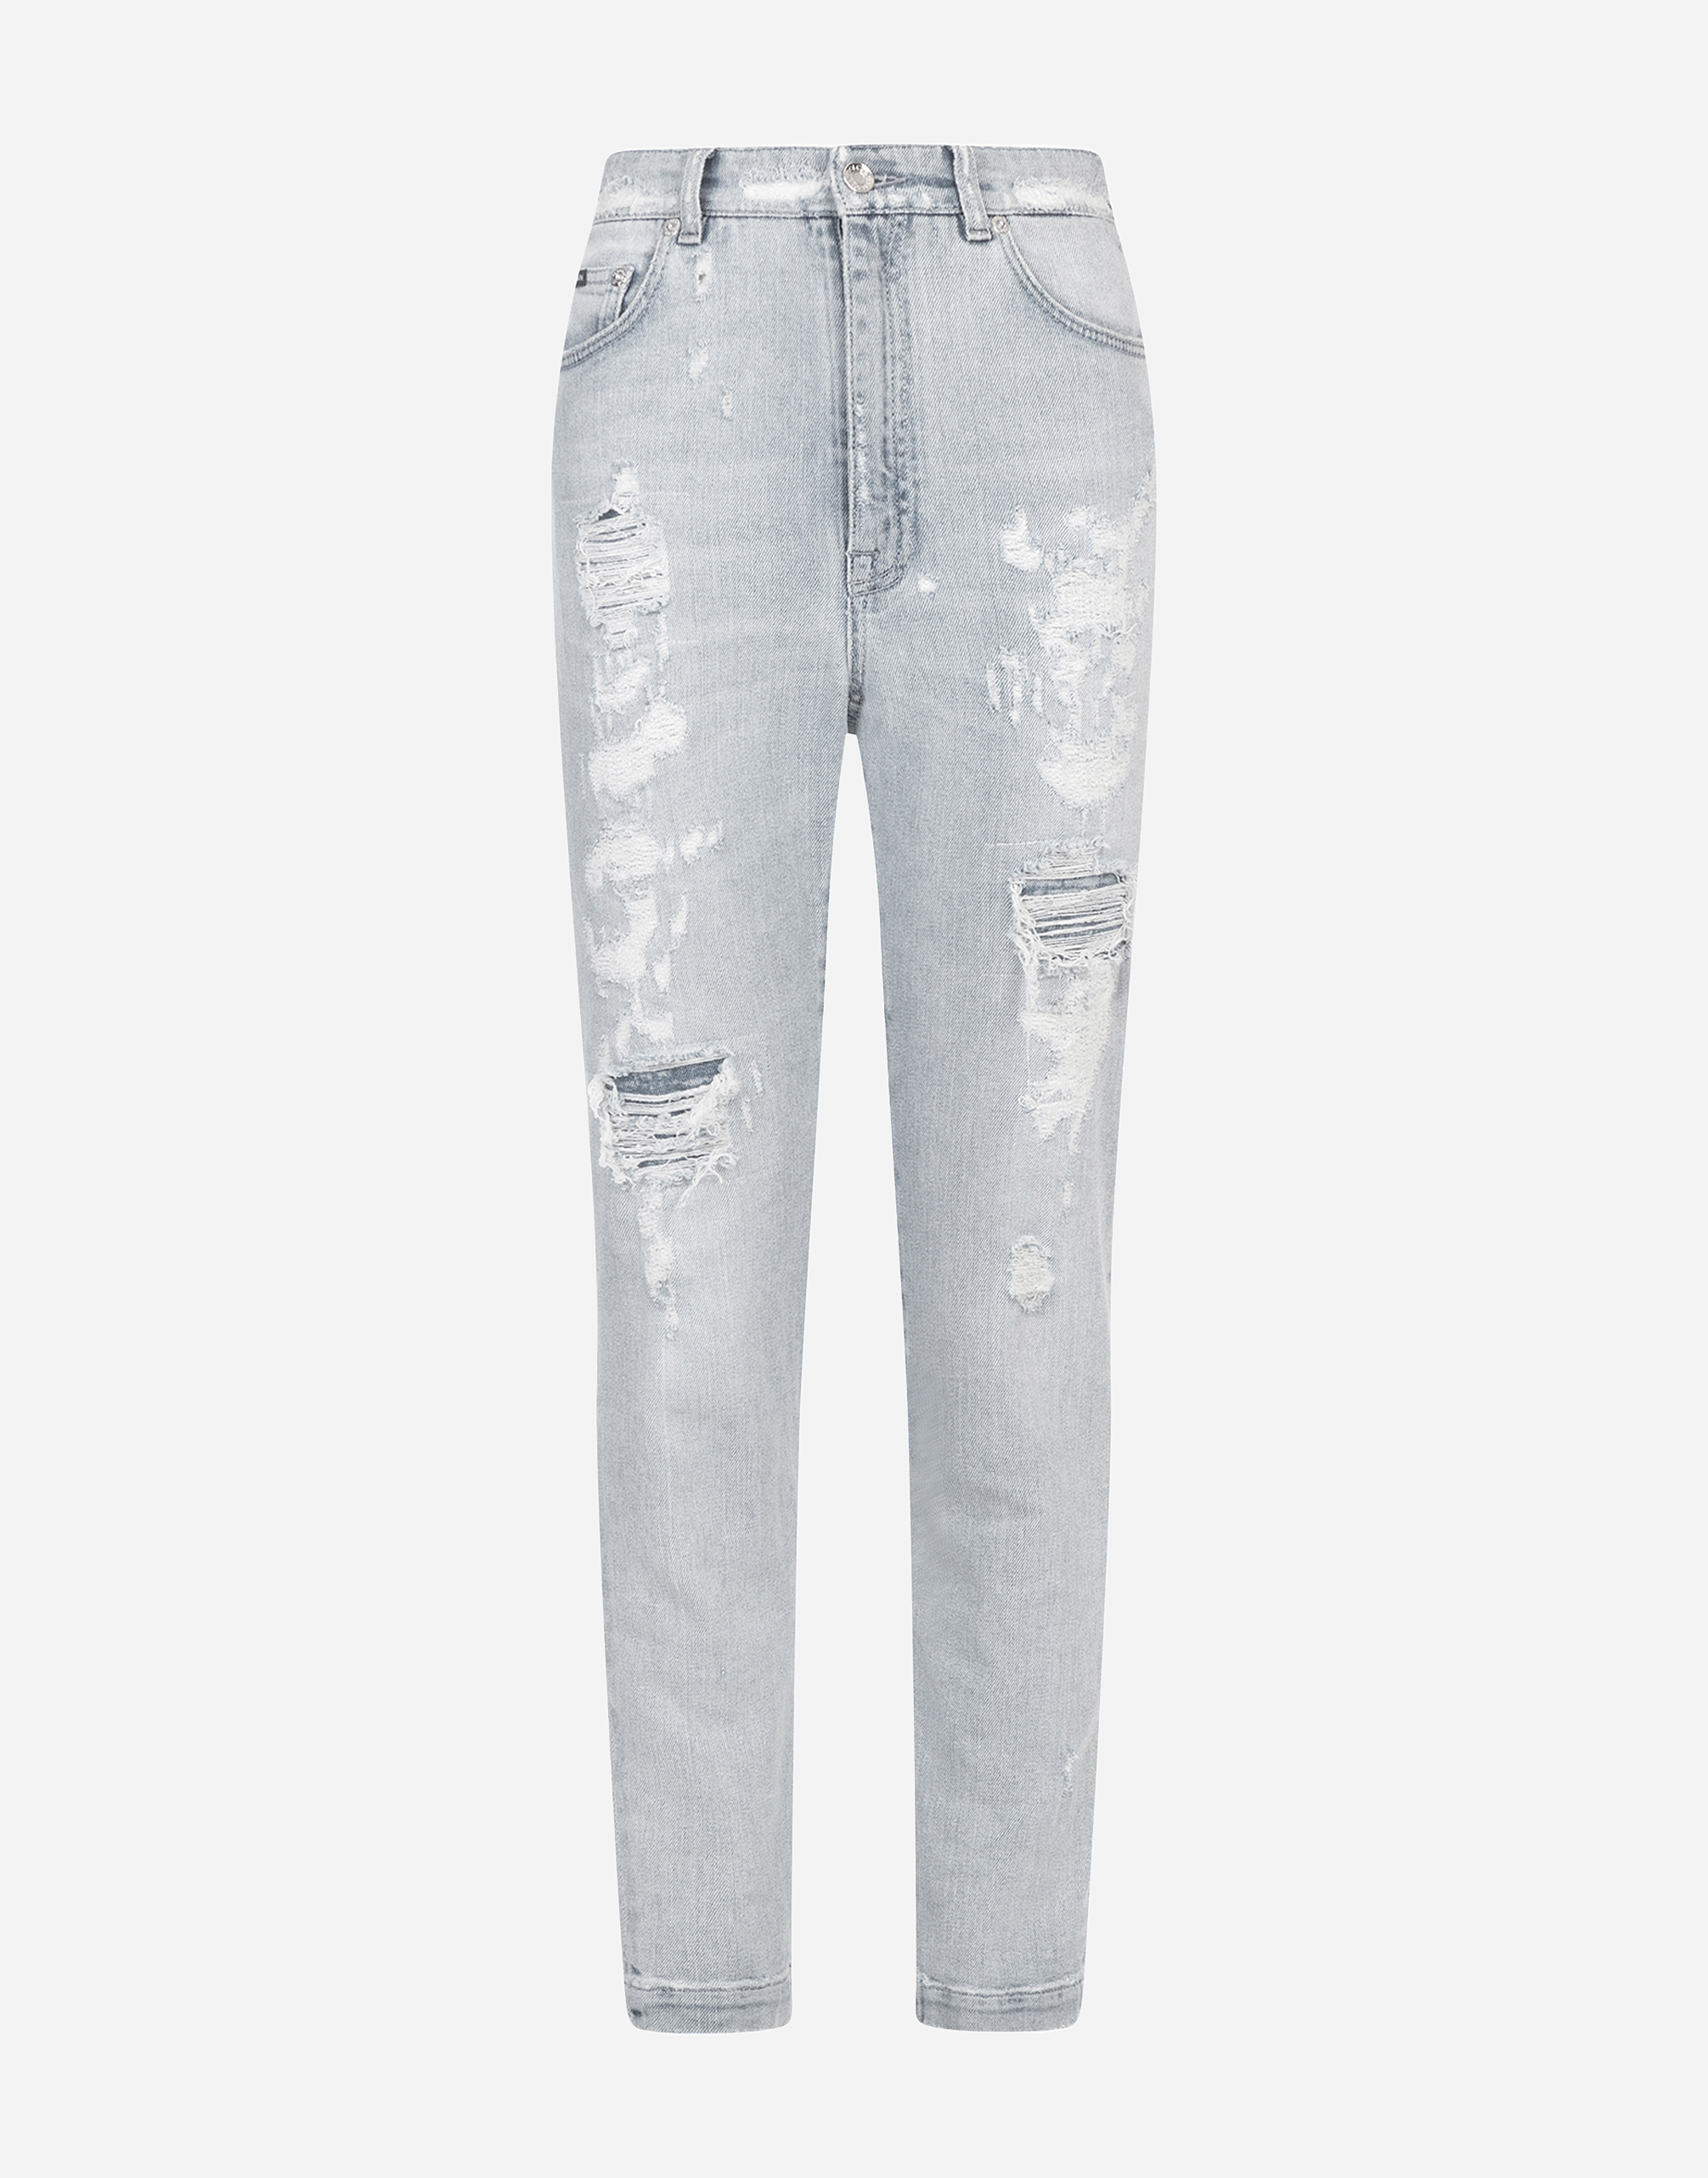 Dolce & Gabbana Audrey Jeans In Light Blue Denim With Rips